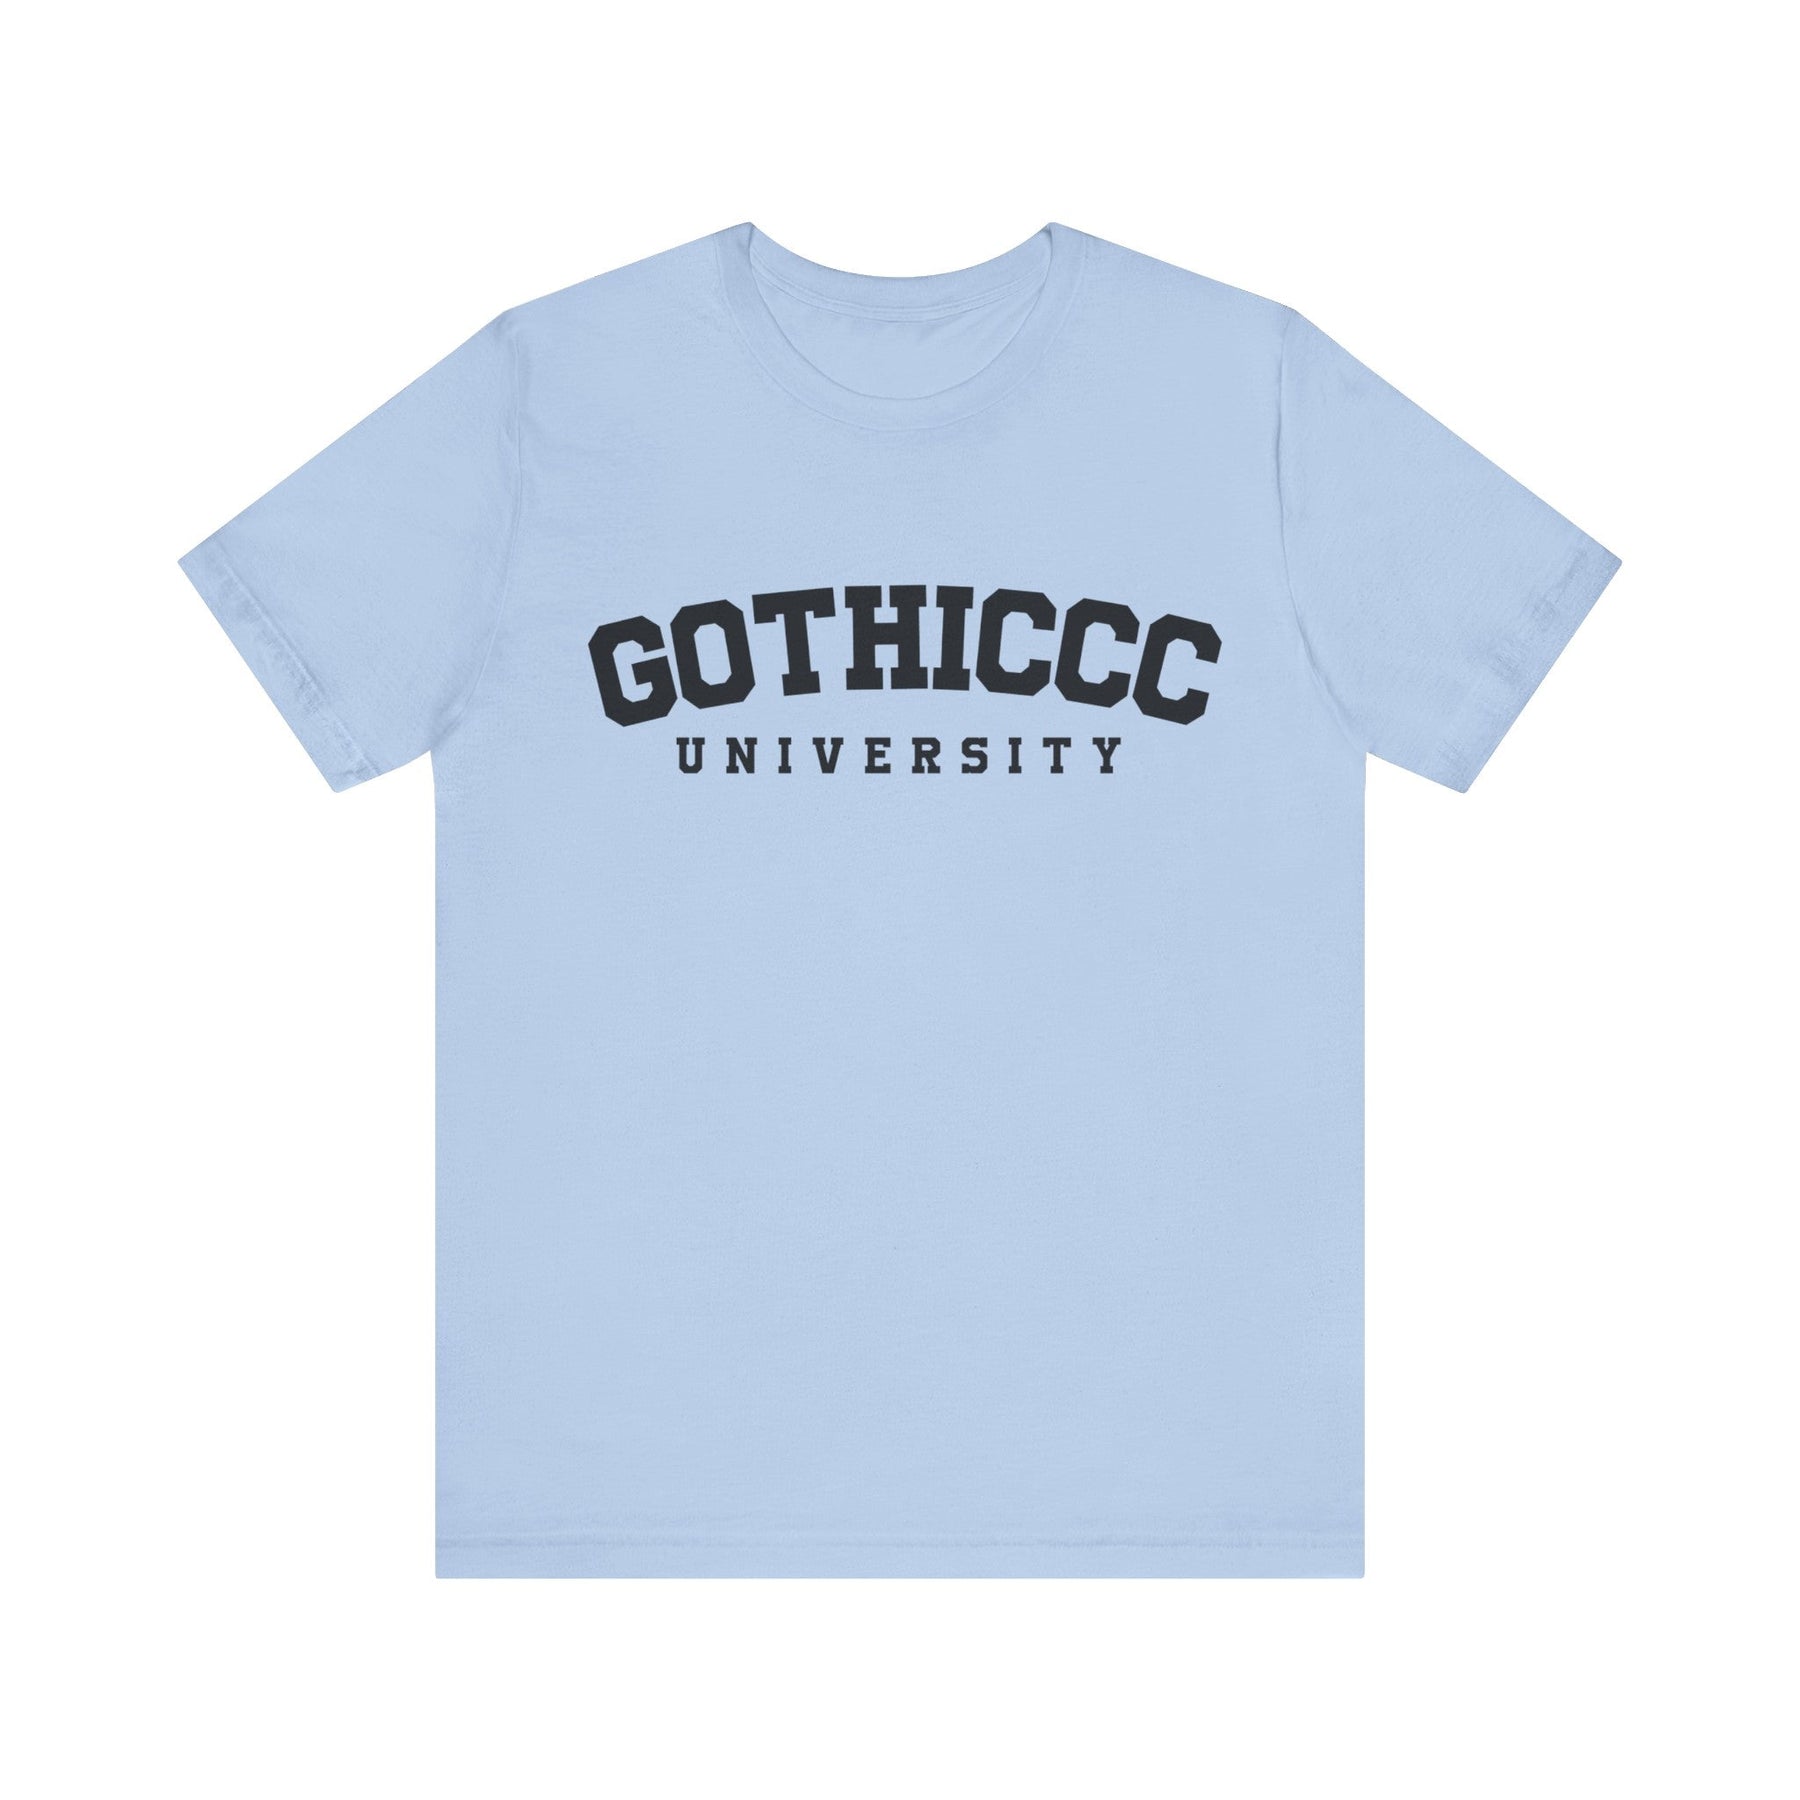 Gothiccc University Short Sleeve Tee - Goth Cloth Co.T - Shirt60648216531218881780